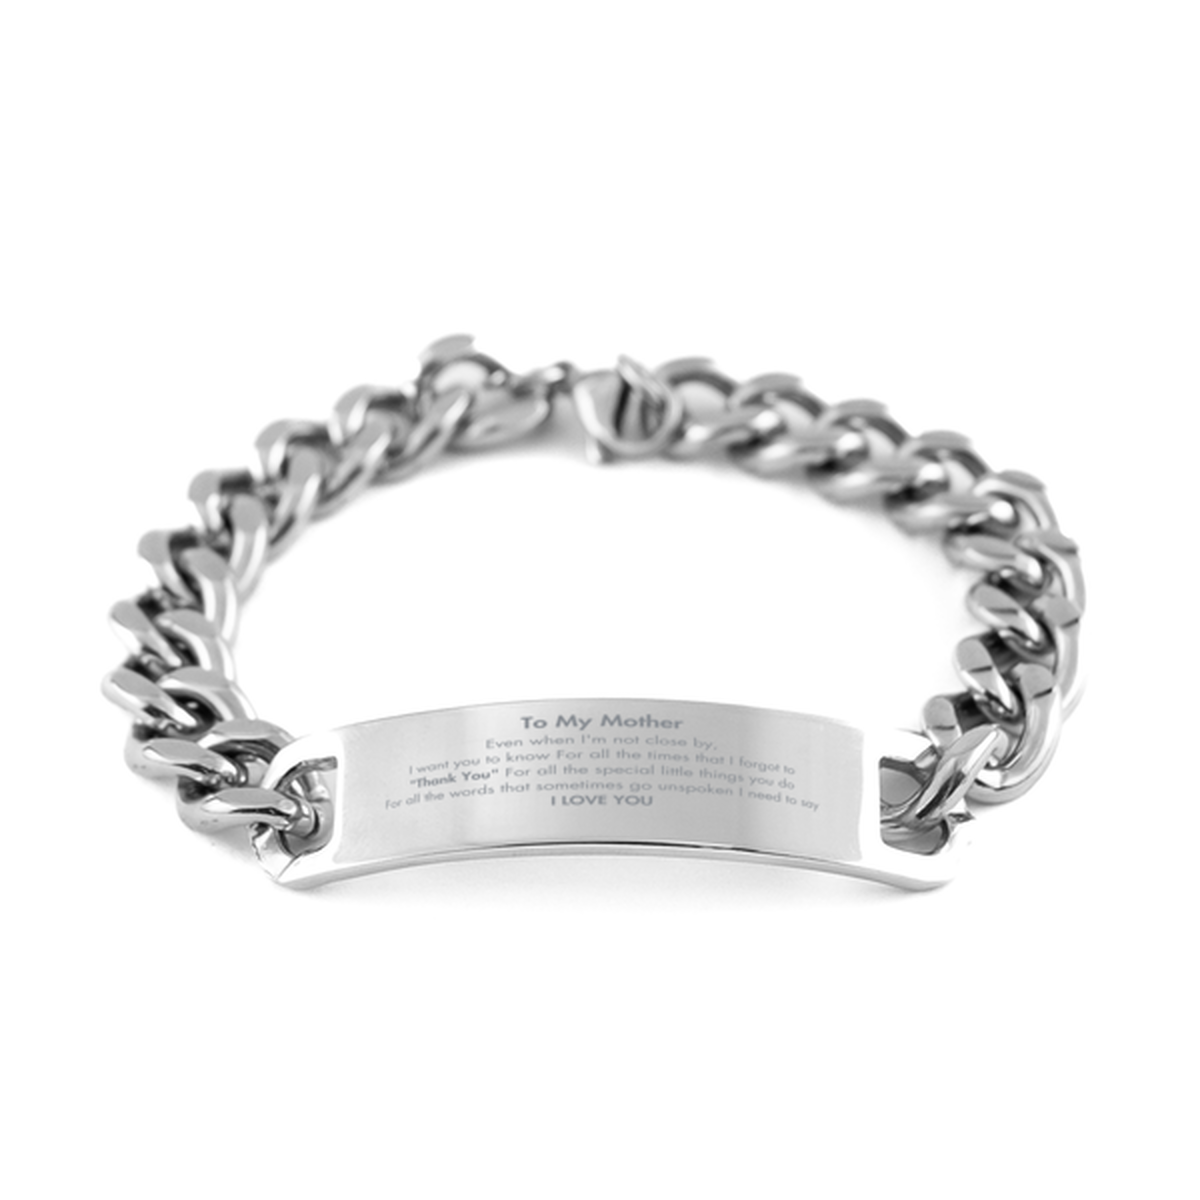 Thank You Gifts for Mother, Keepsake Cuban Chain Stainless Steel Bracelet Gifts for Mother Birthday Mother's day Father's Day Mother For all the words That sometimes go unspoken I need to say I LOVE YOU